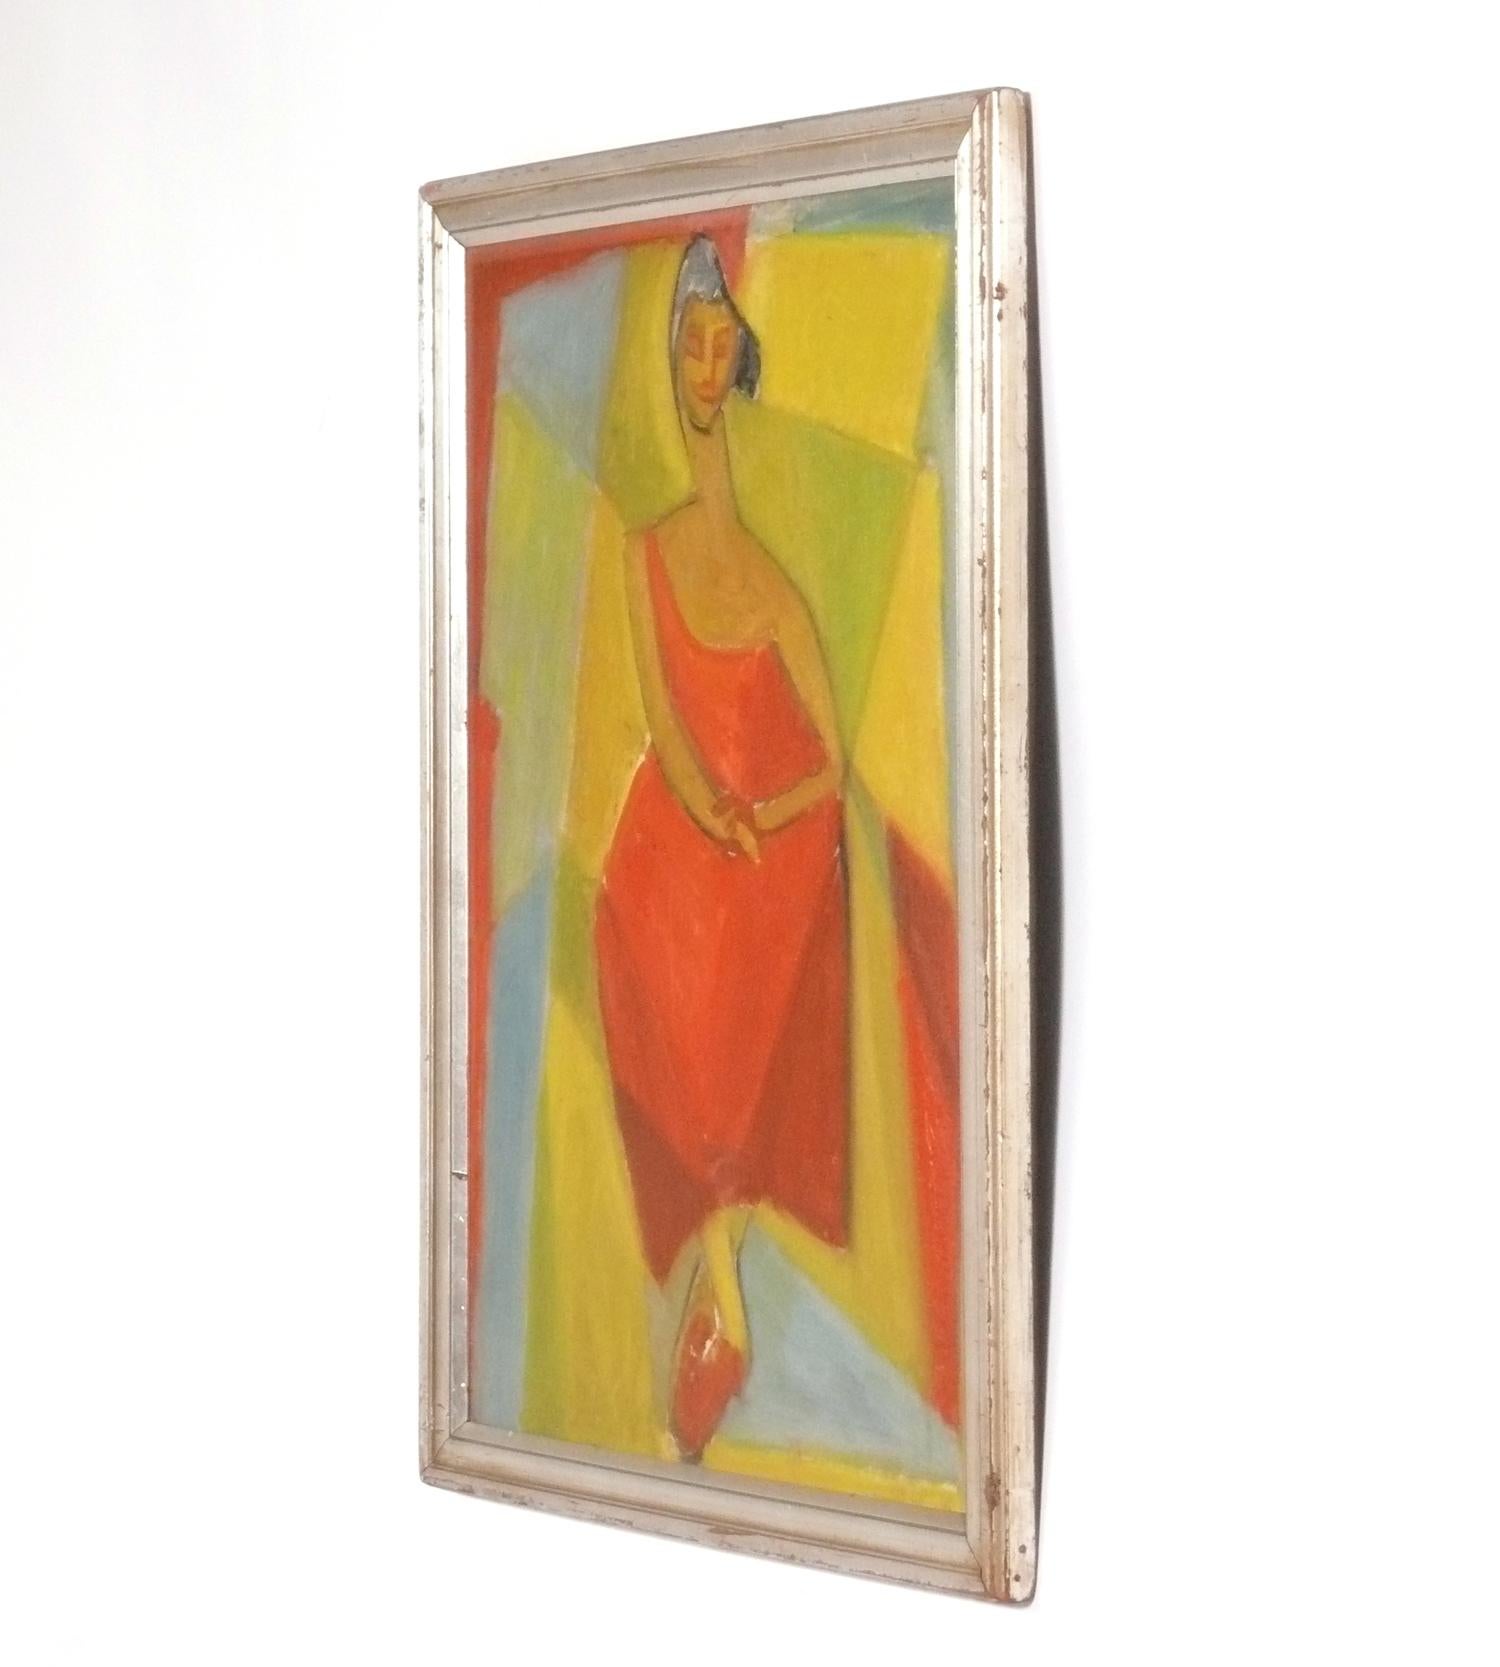 Original Cubist woman painting, artist unknown, American, circa 1930s. Framed in a vintage silver leaf wood frame. It measures 22 inch height by 17 inch width framed.